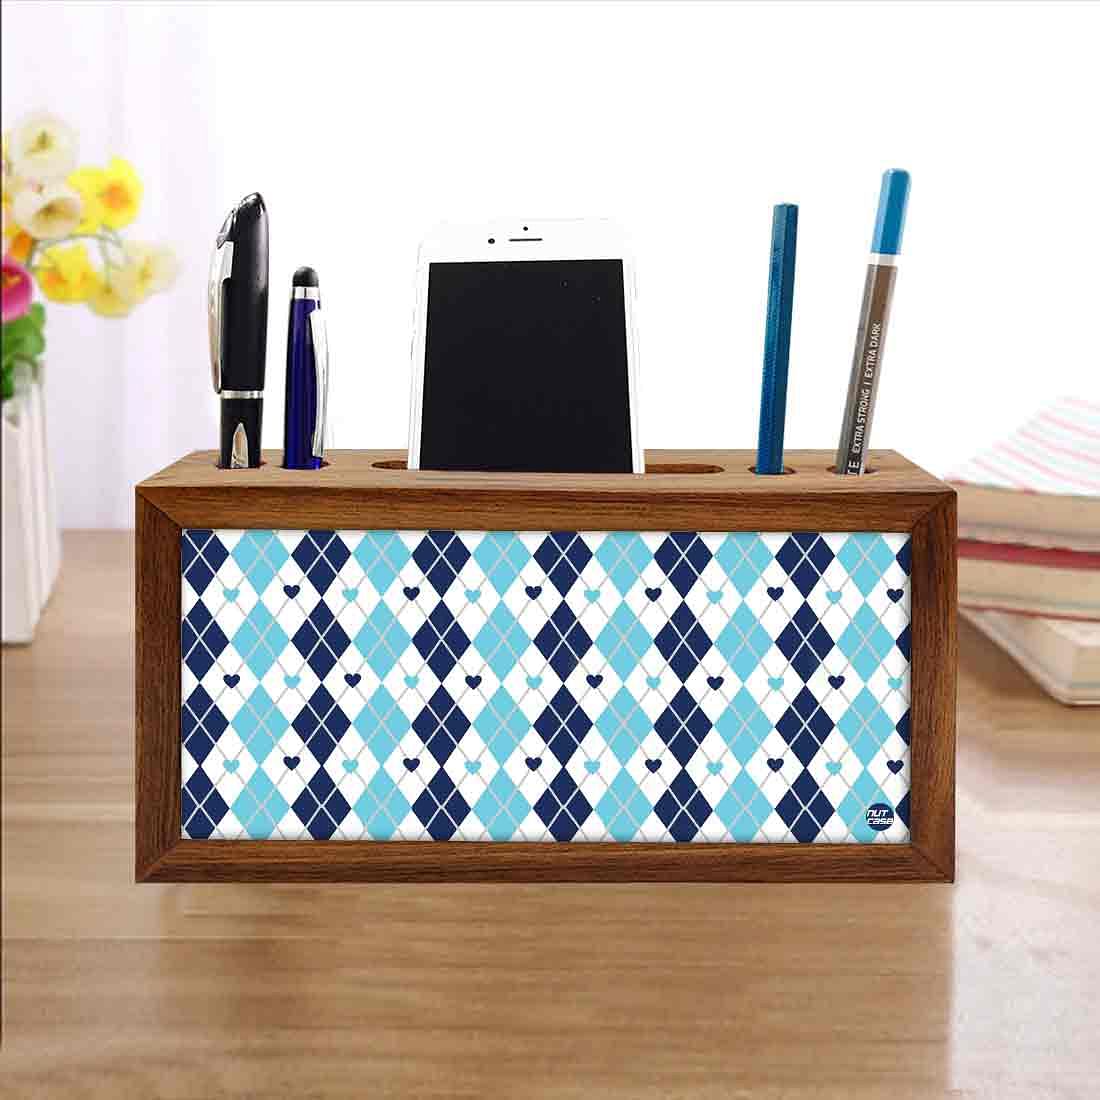 Small Pen Mobile Stand Desk Organizer for Office & Study Table - Blue Plaids Nutcase